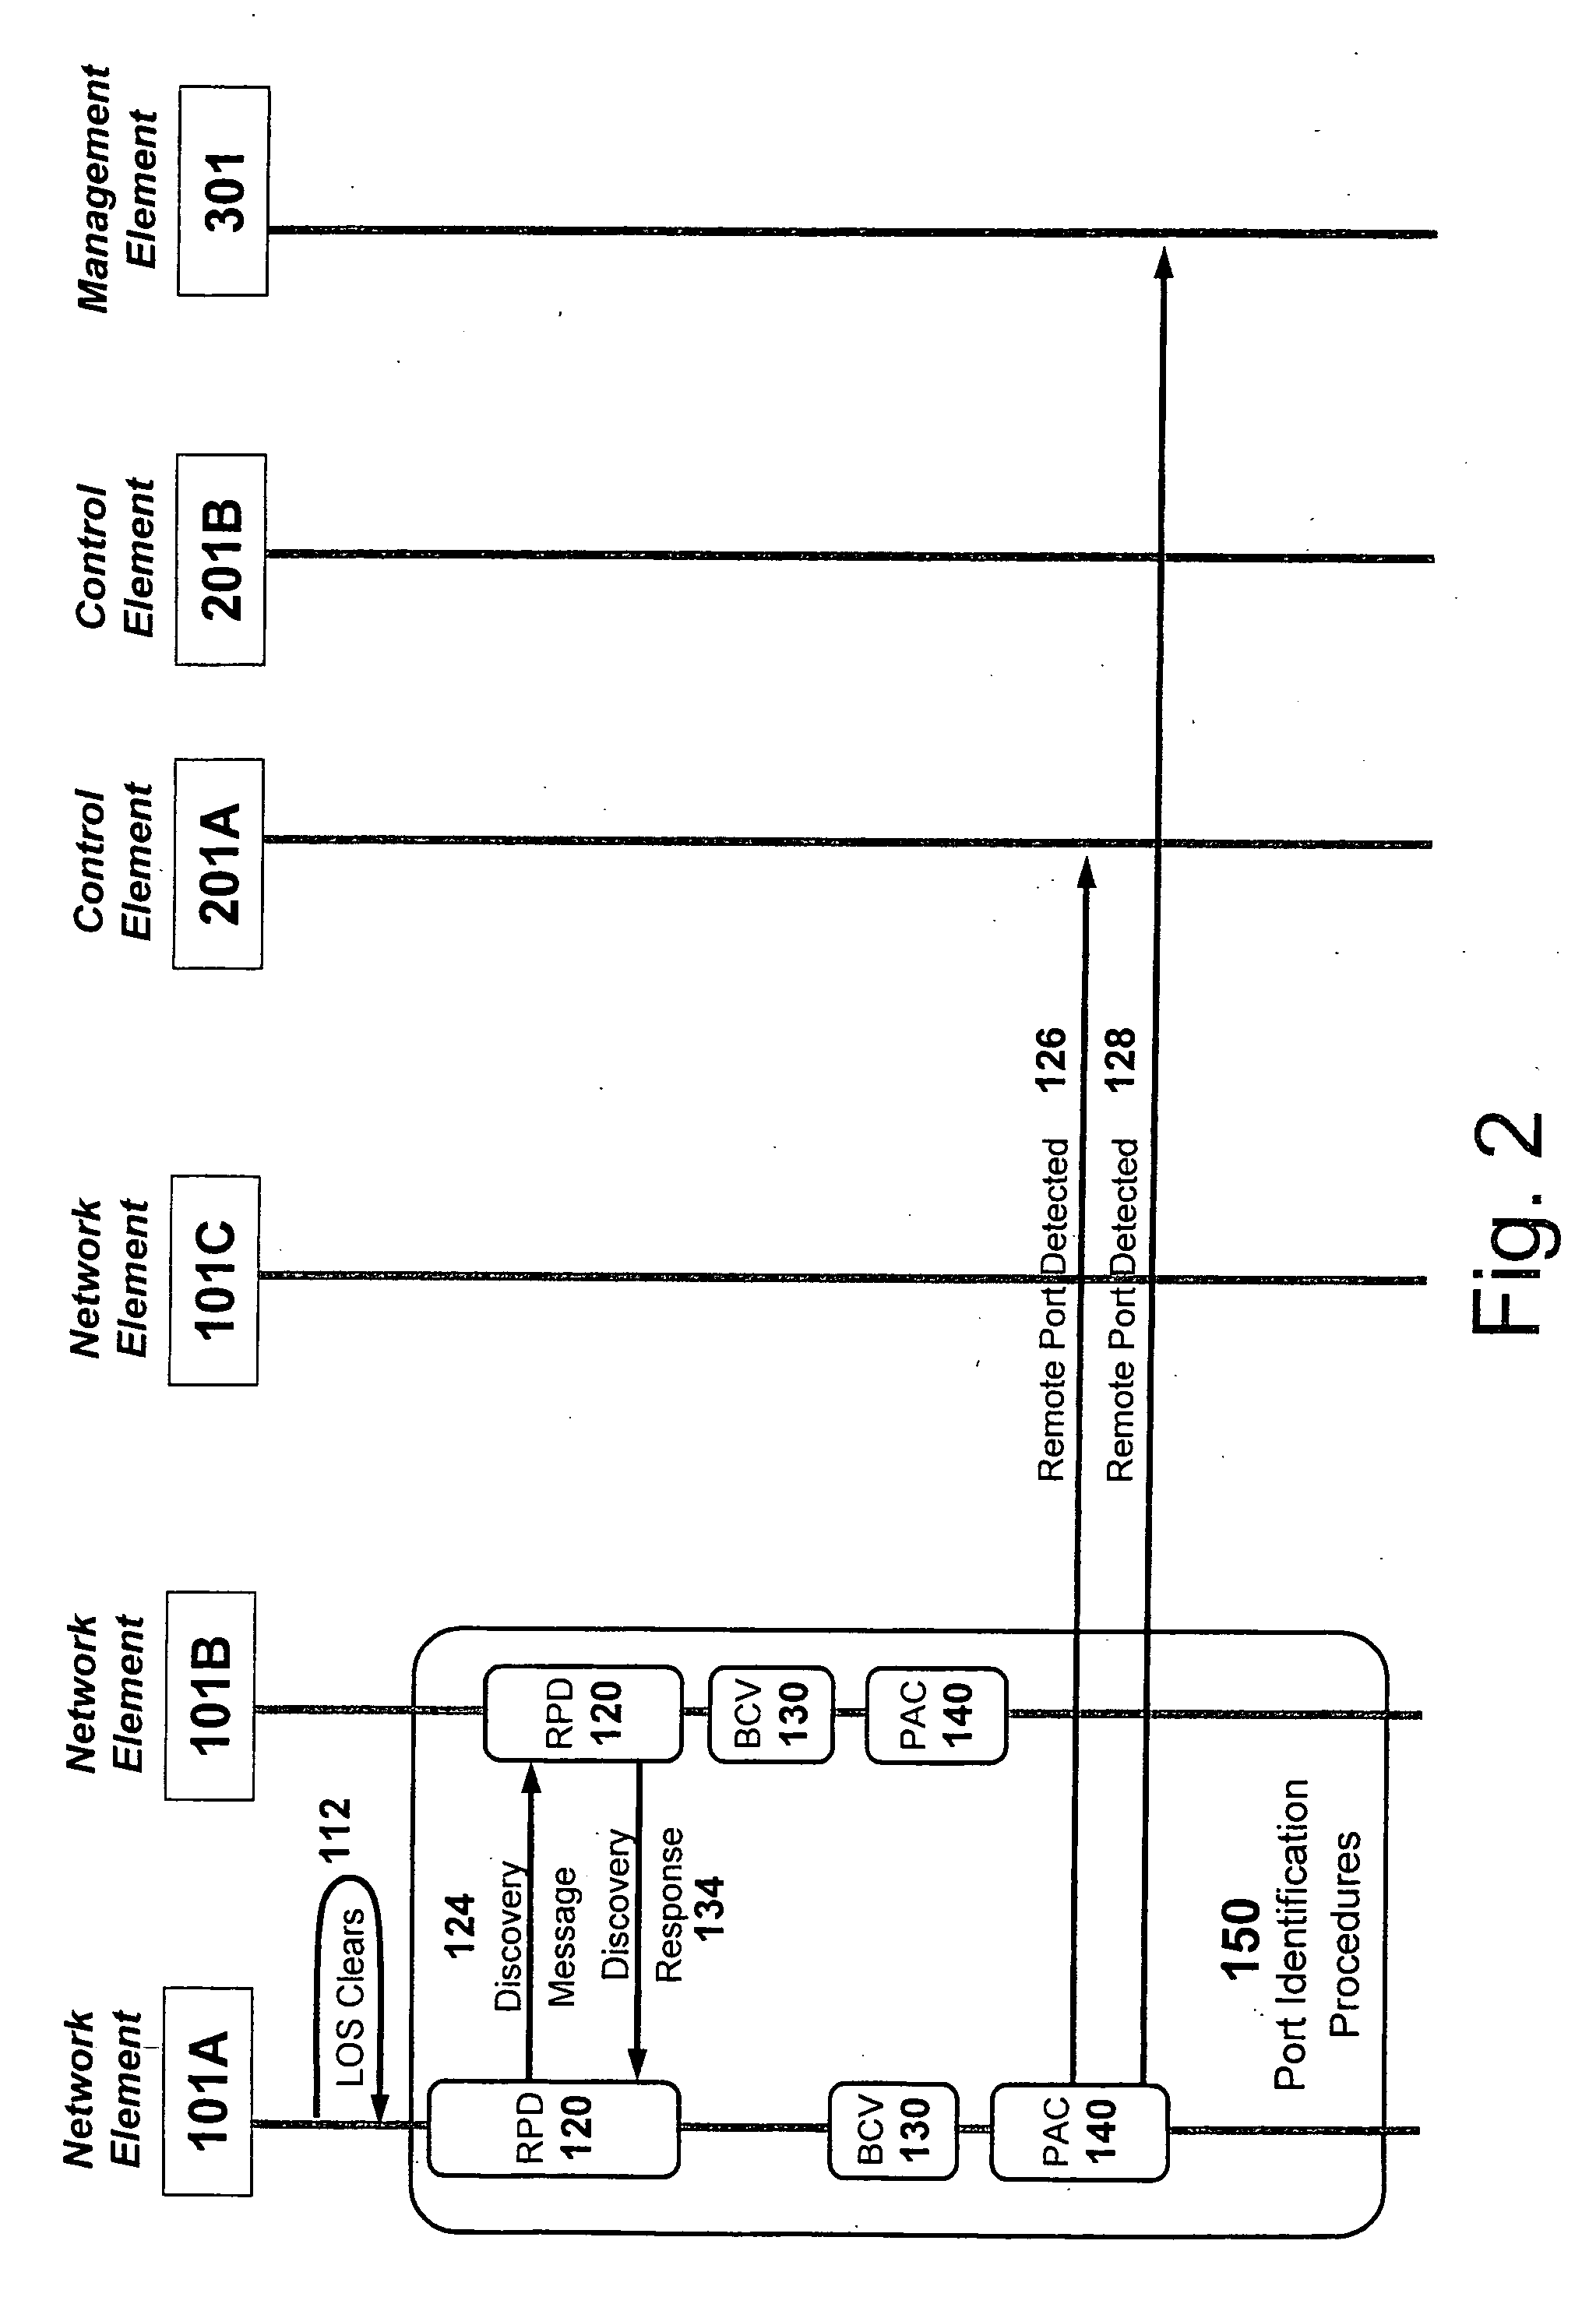 Method and system for autonomous link discovery and network management connectivity of remote access devices